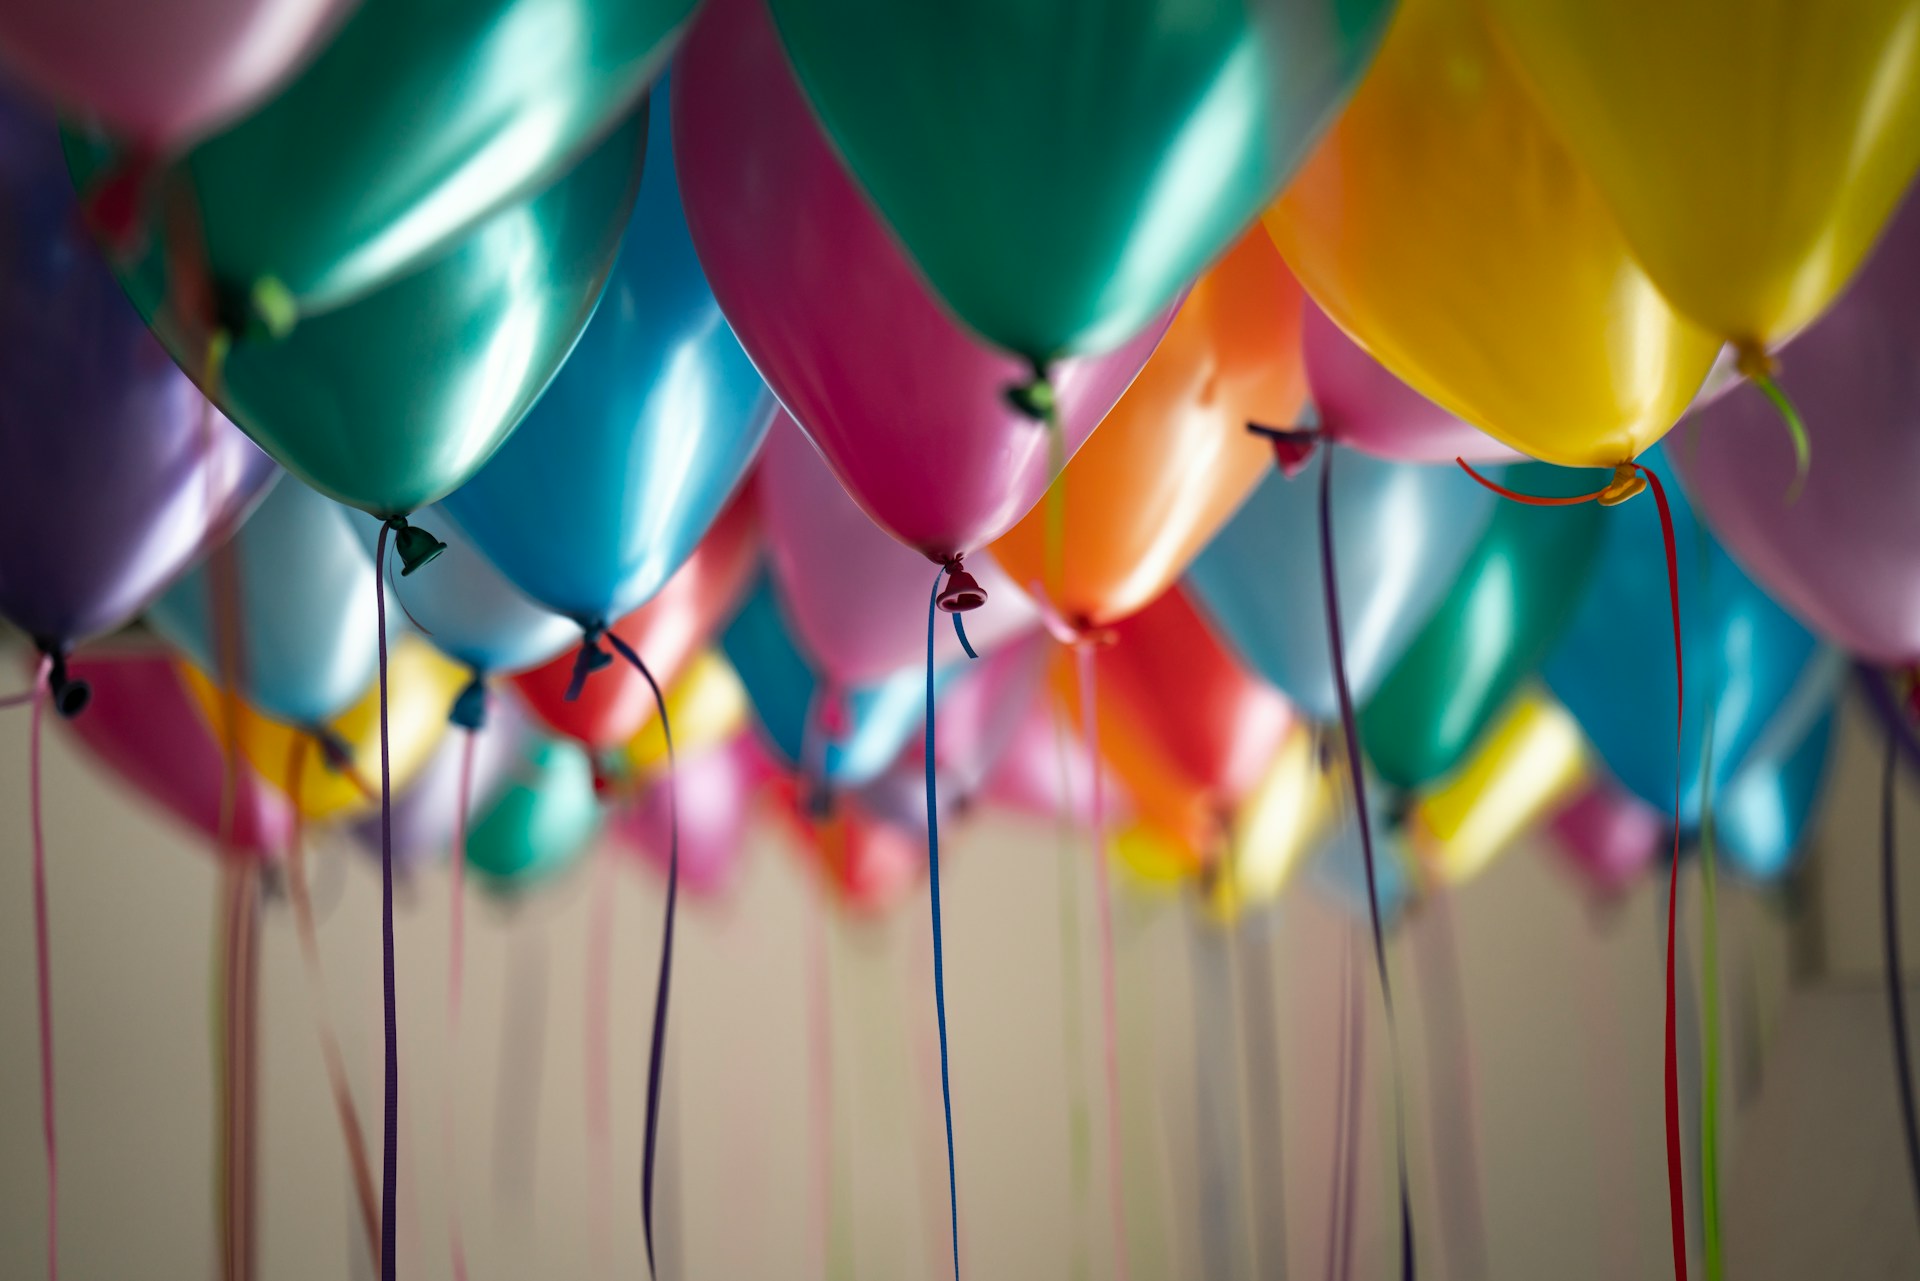 Various colored balloons floating in a room